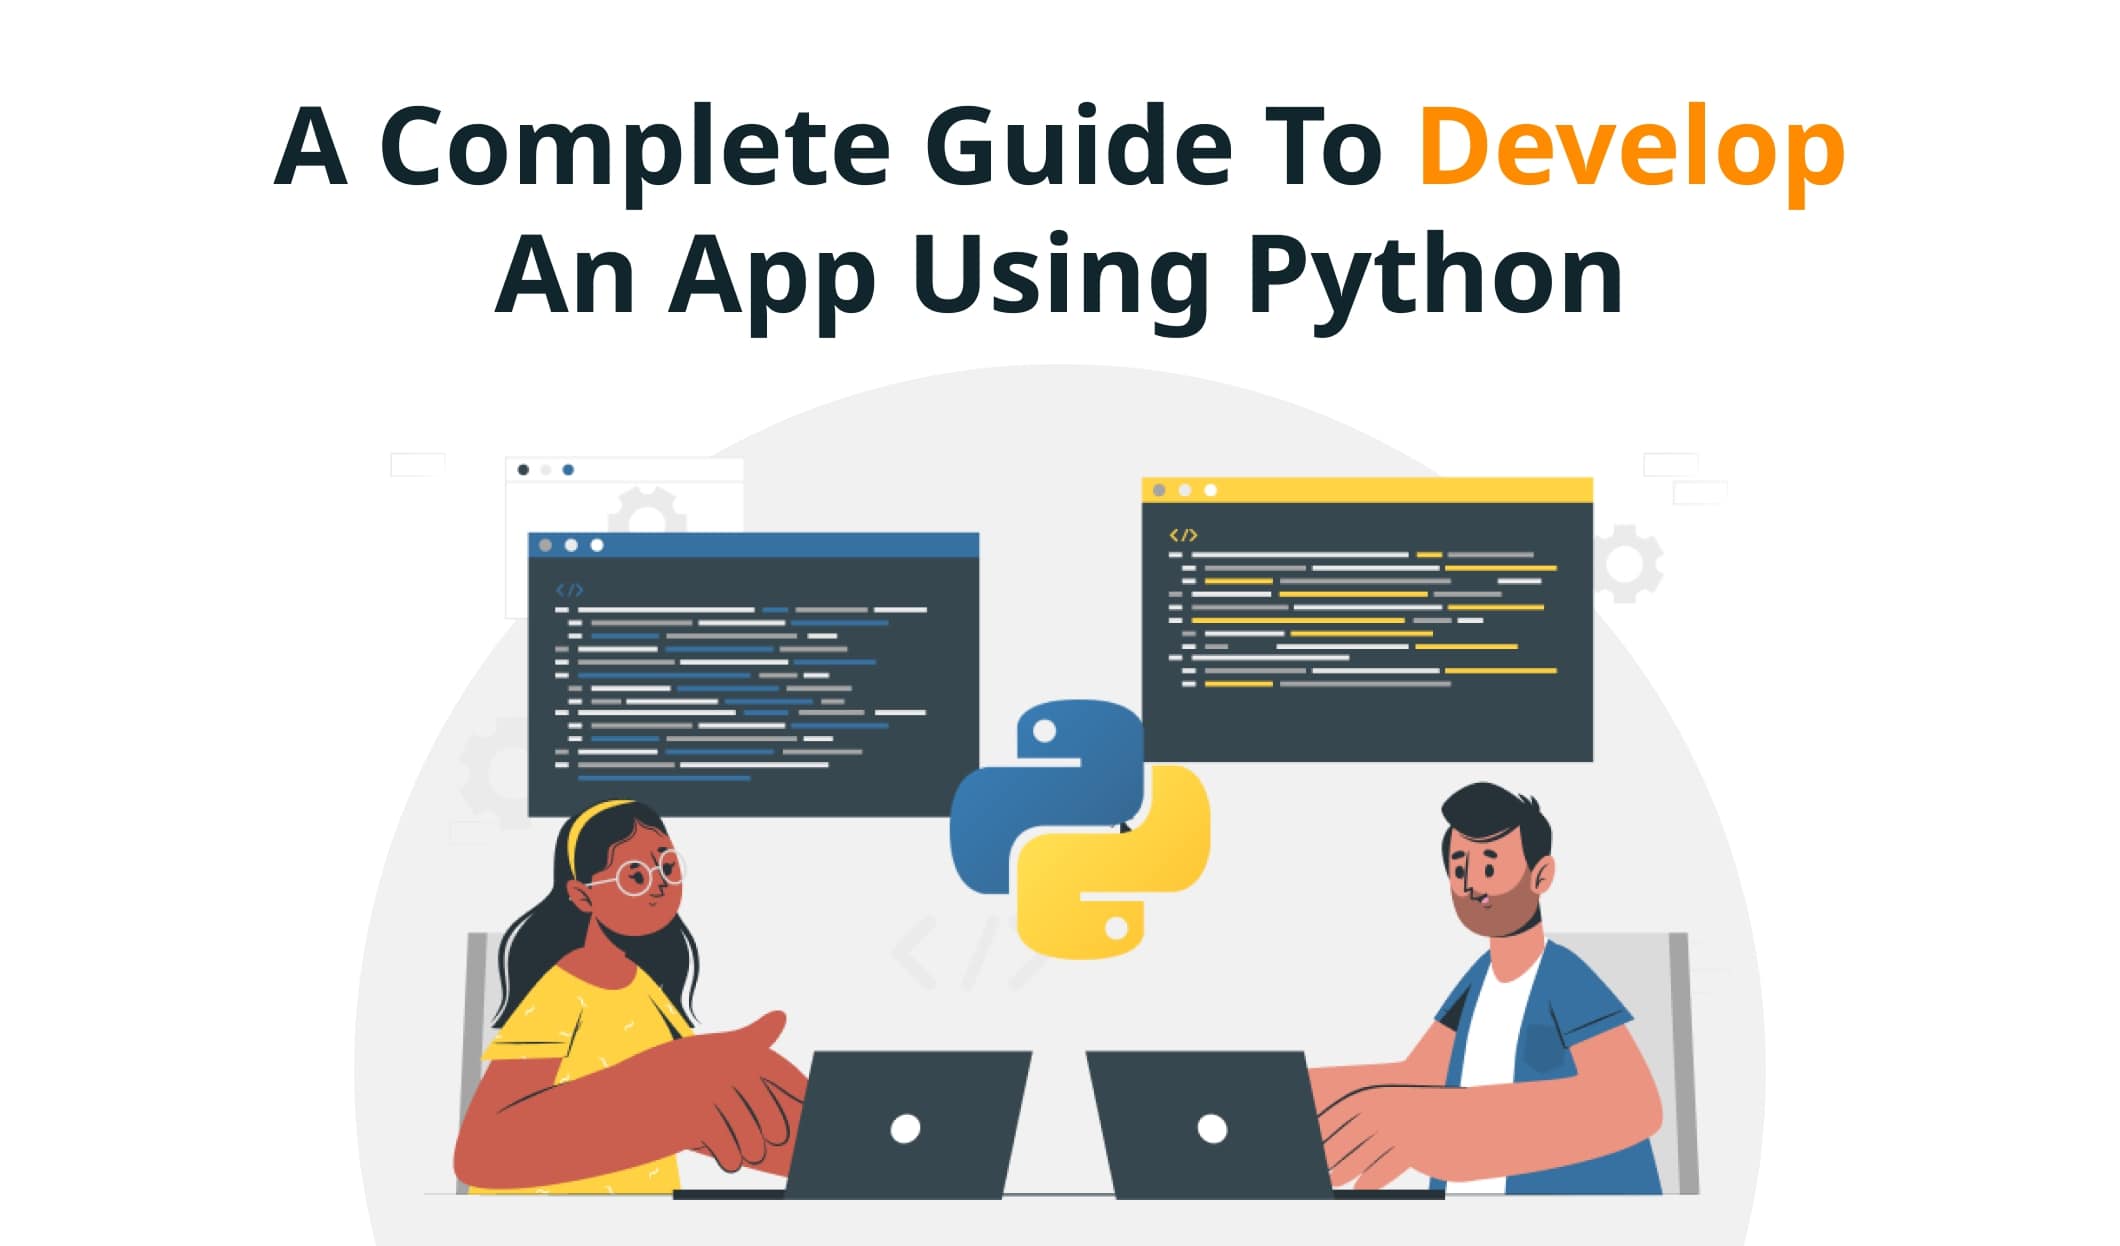 A Complete Guide to Develop an App Using Python